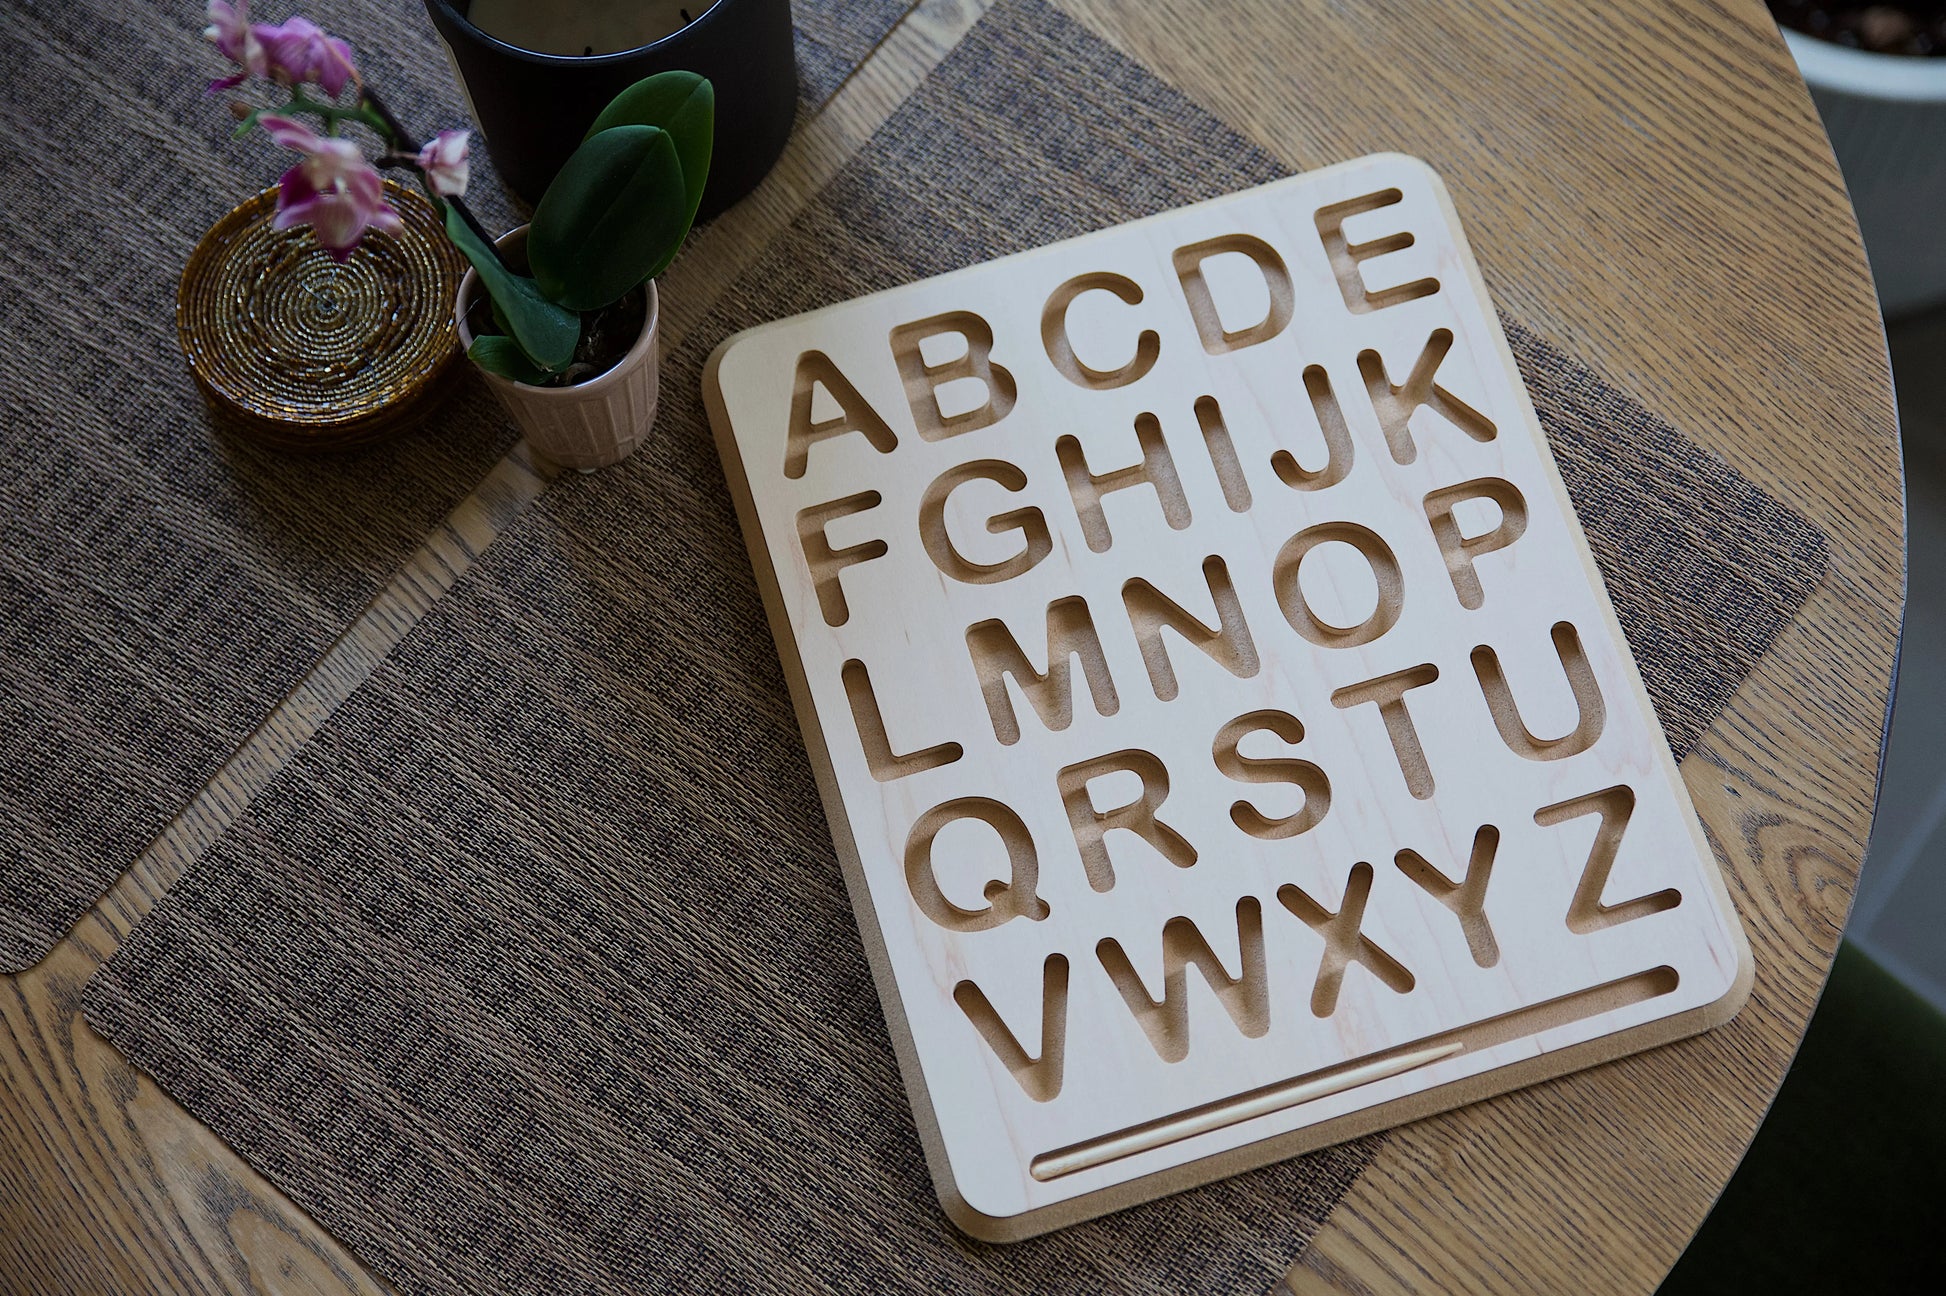 Wooden Alphabet Tracing Board with Upper Case and Numbers